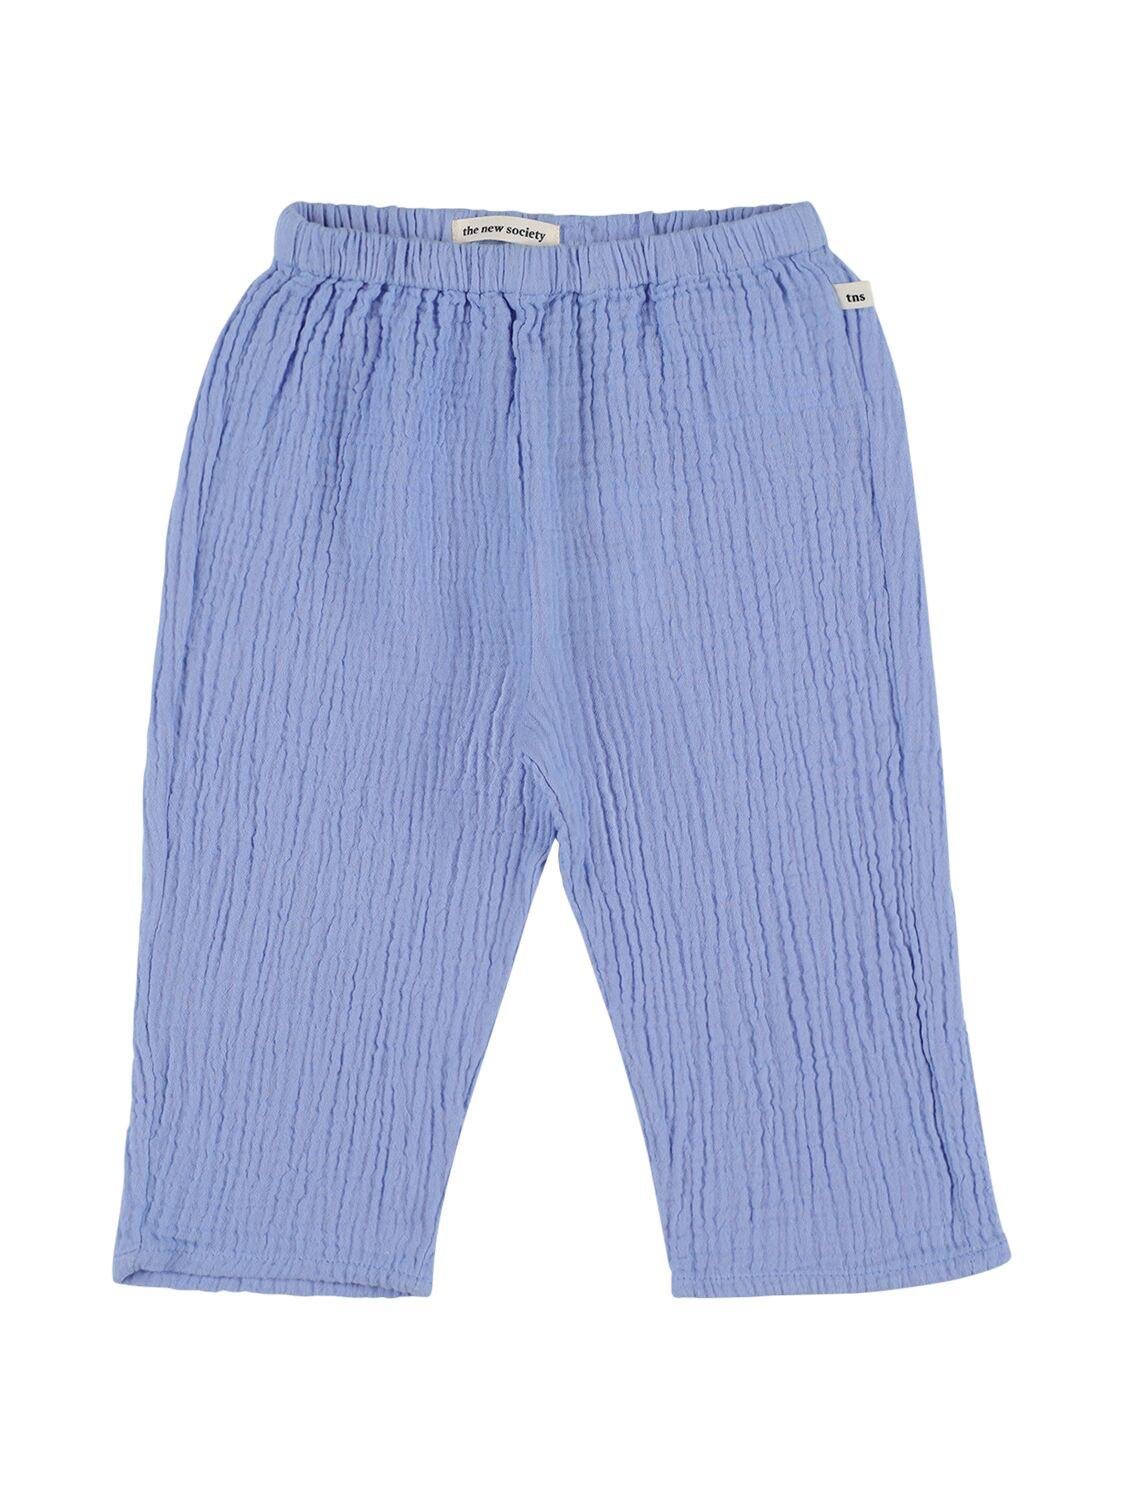 Cotton Piquet Pants by THE NEW SOCIETY